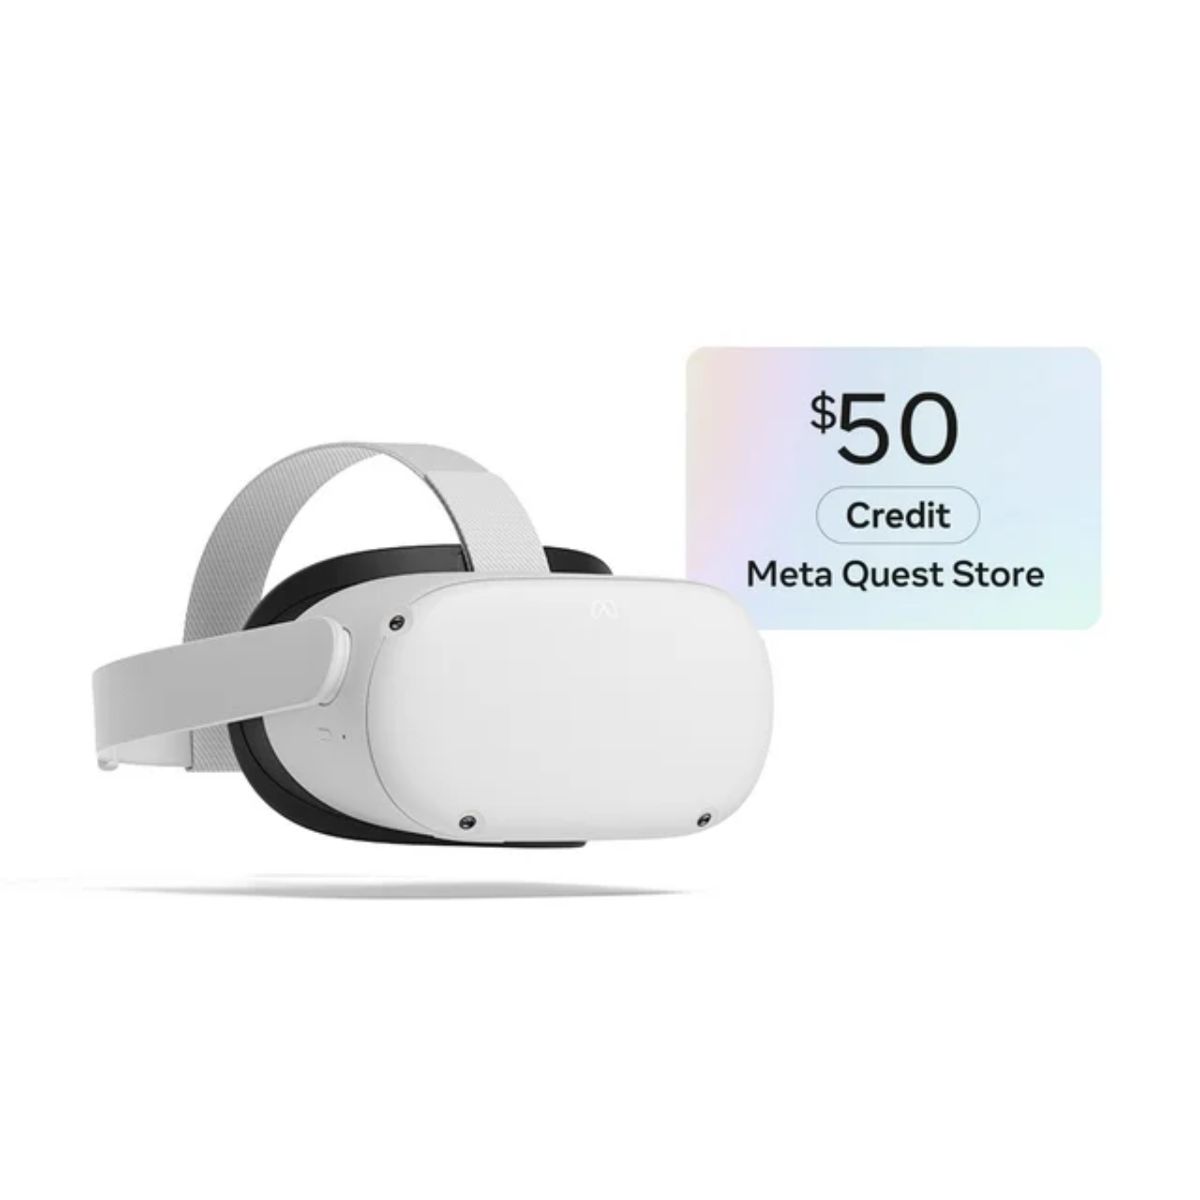 At $199.99, the Meta Quest 2 is a great value